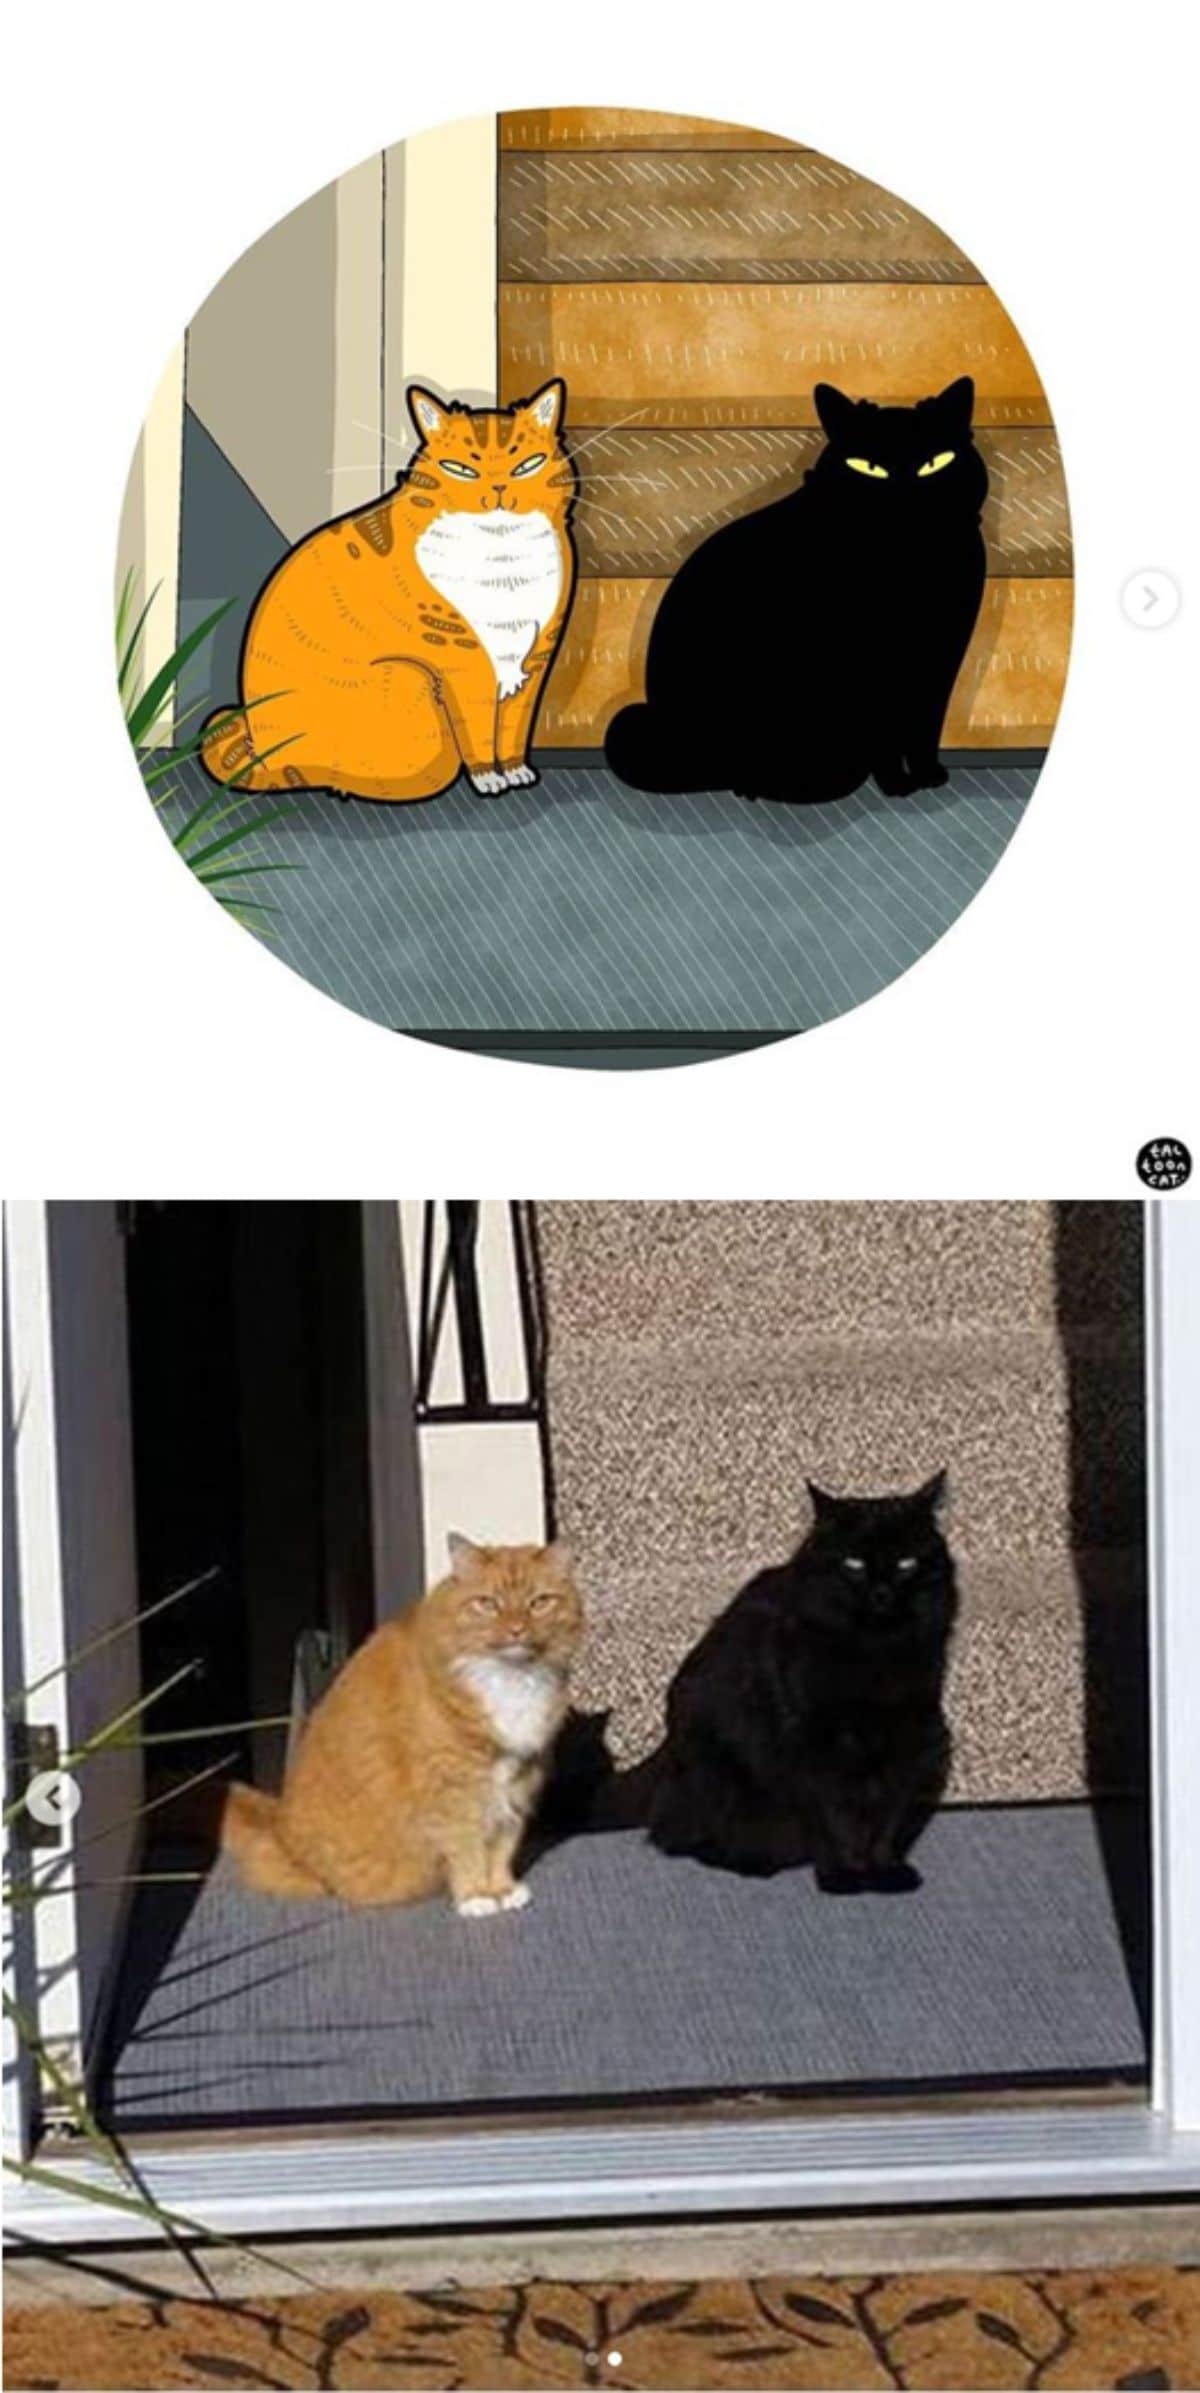 cartoon photo and real photo of an orange and white cat and a black cat sitting at a doorway together